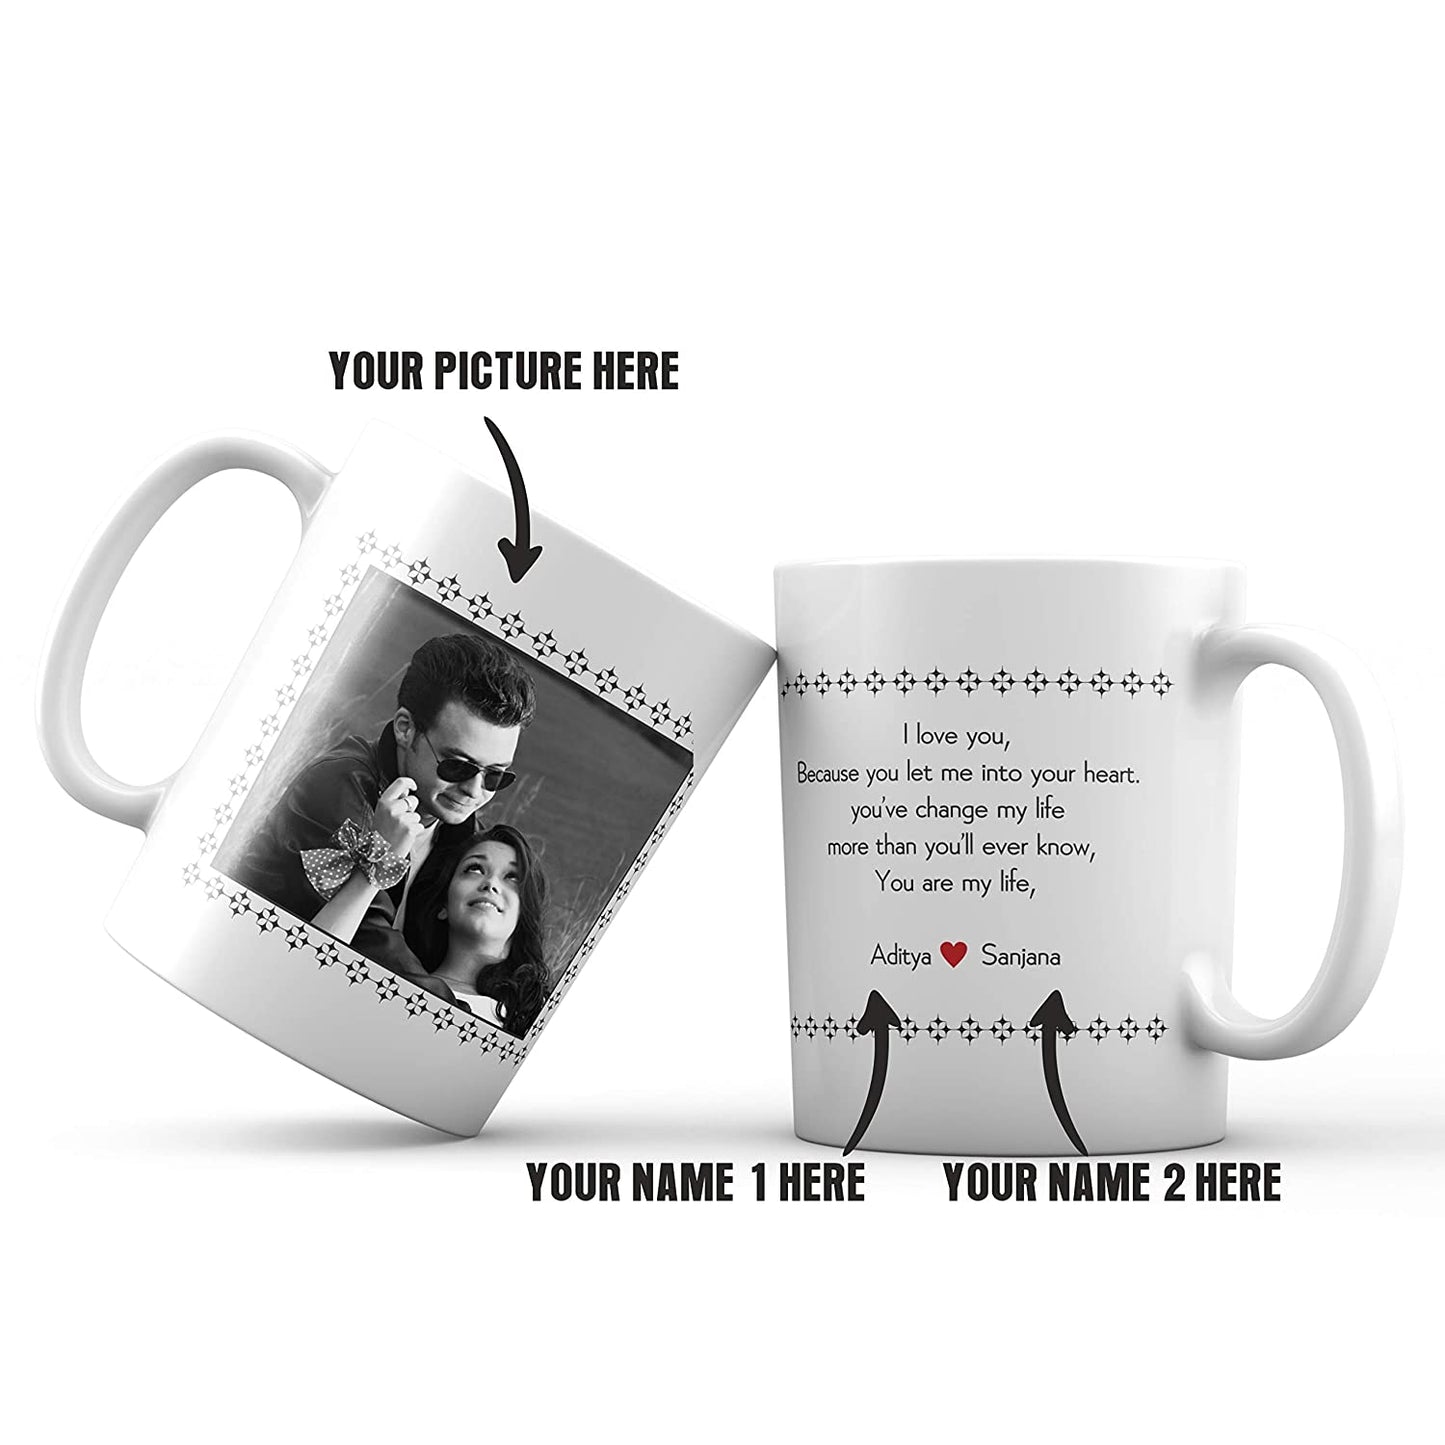 iberry's Customized/ Personalized Photo Coffee Mugs | Gift for boyfriend & Girlfriend | Gift for lovers & couples - (66)